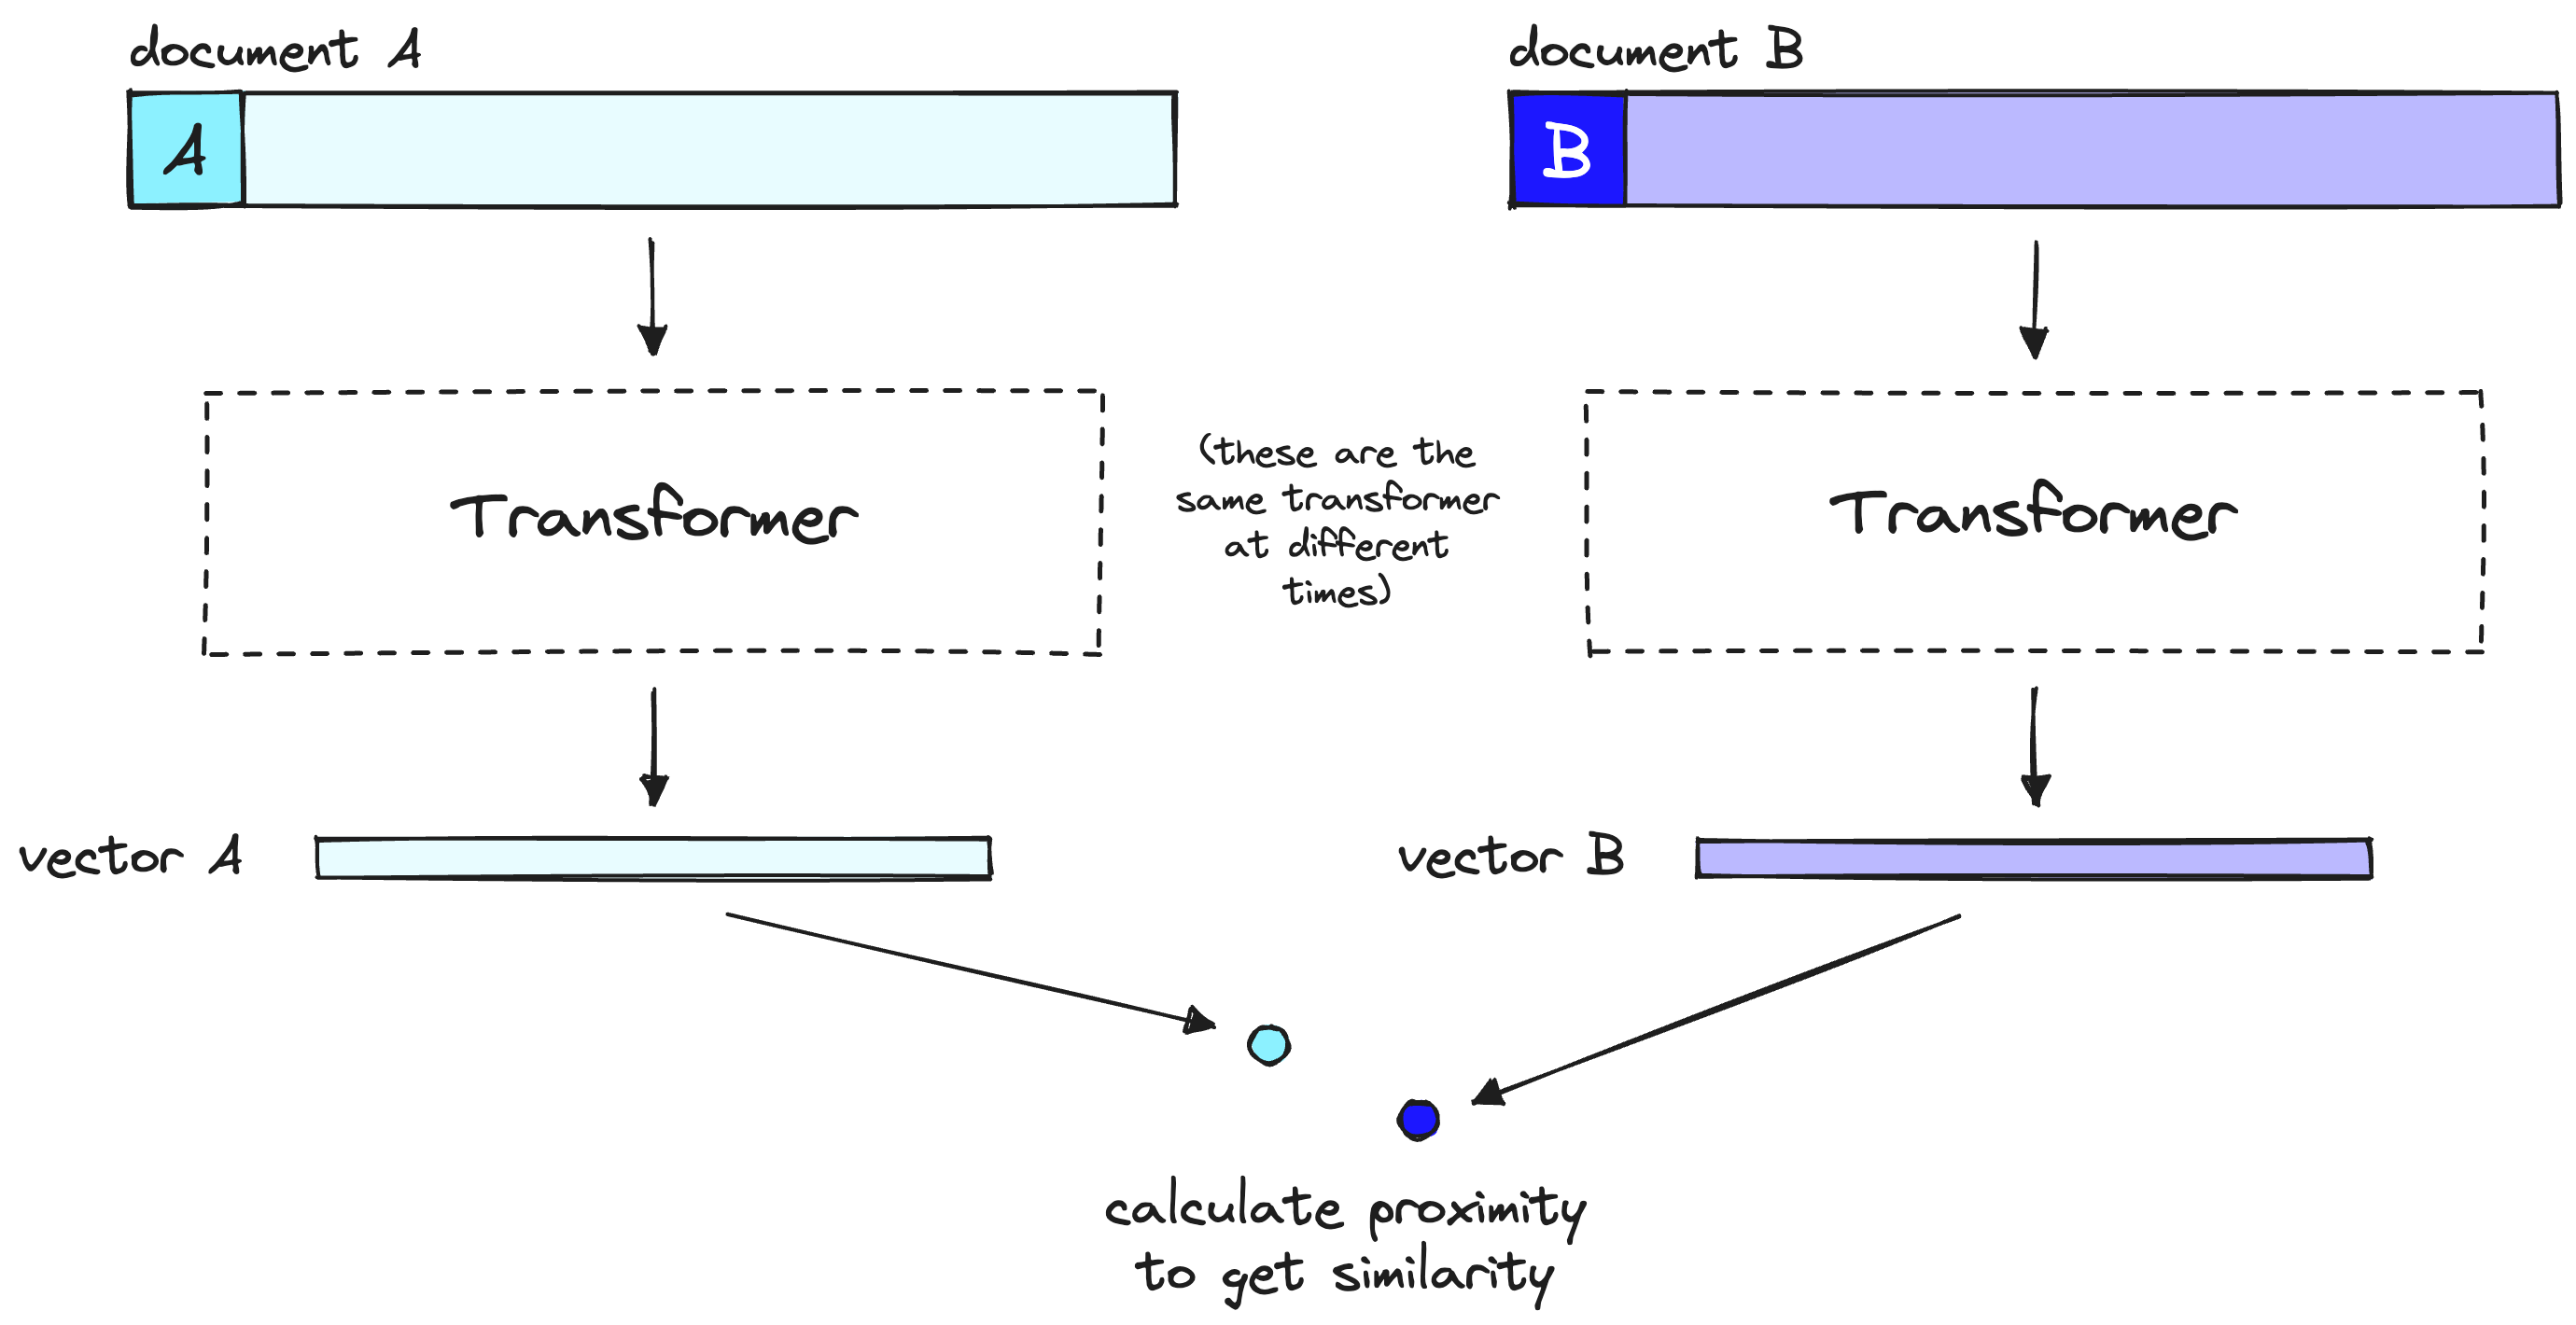 A bi-encoder model compresses the document or query meaning into a single vector. Note that the bi-encoder processes our query in the same way as it does documents, but at user query time.